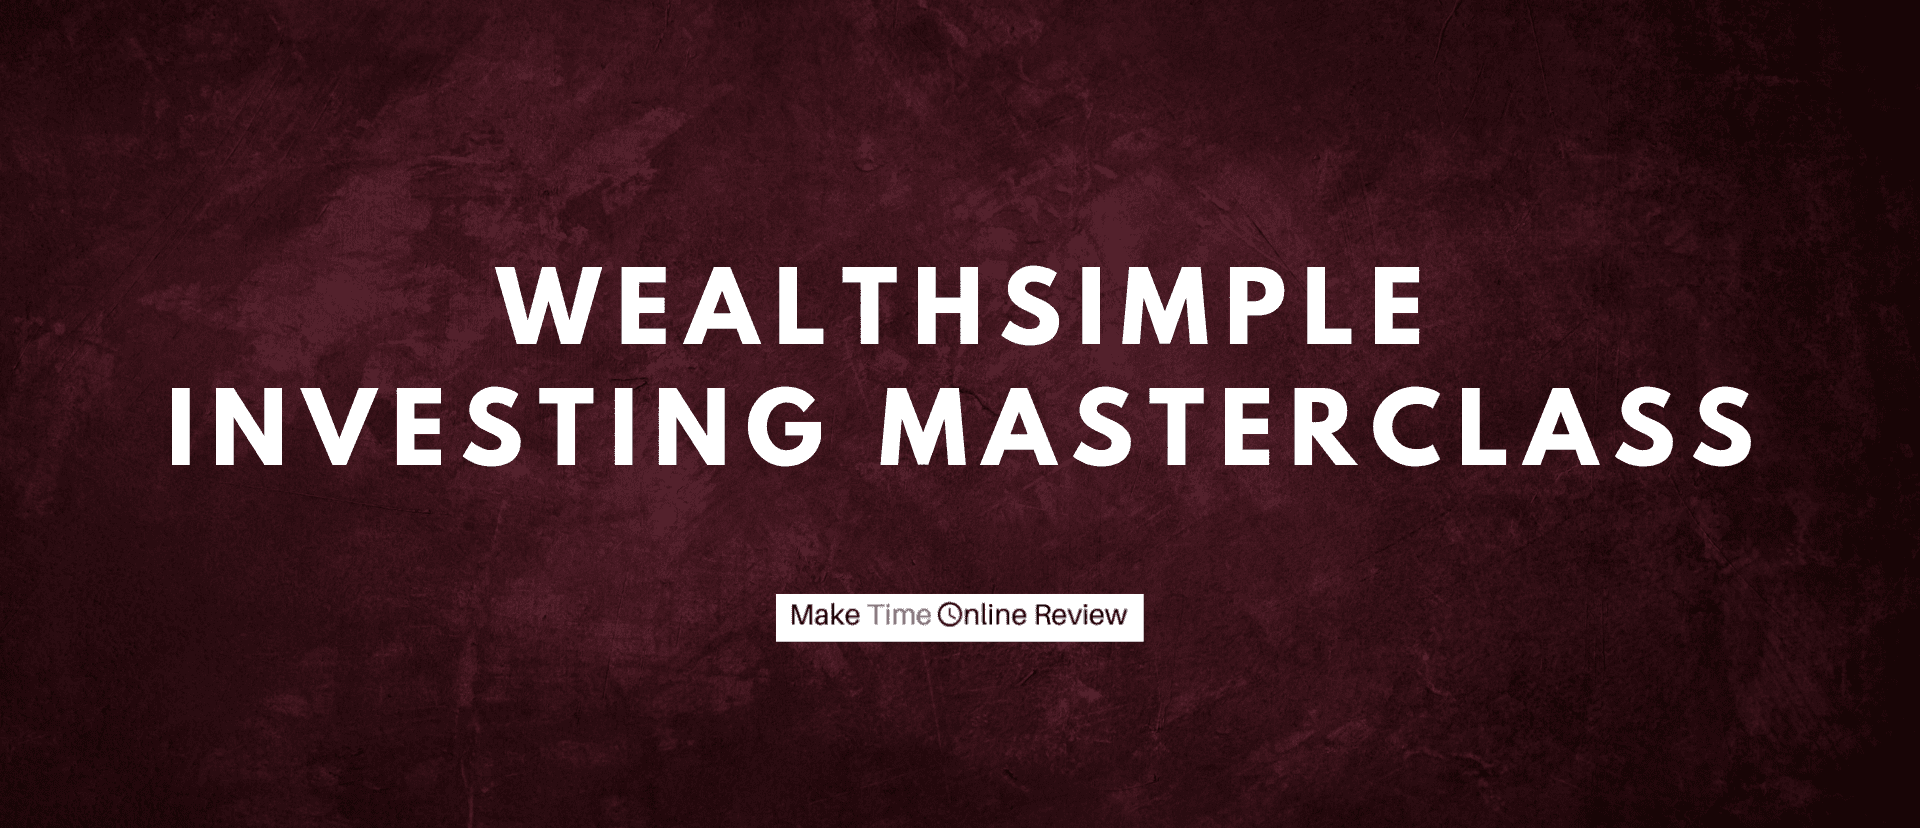 Wealthsimple Investing Masterclass